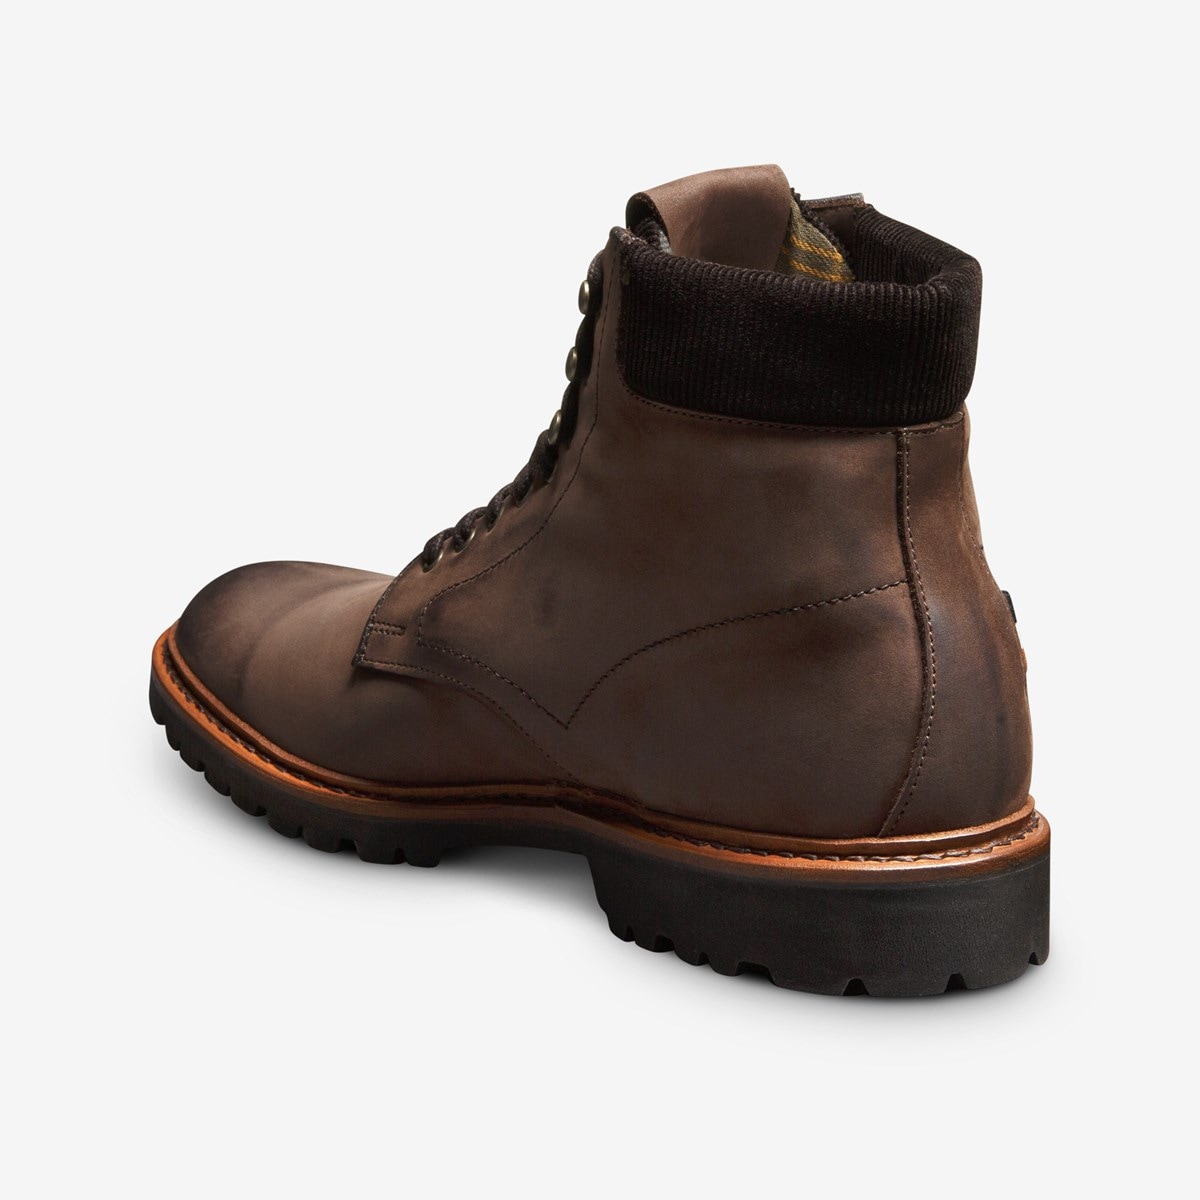 Barbour Work Boots | lupon.gov.ph